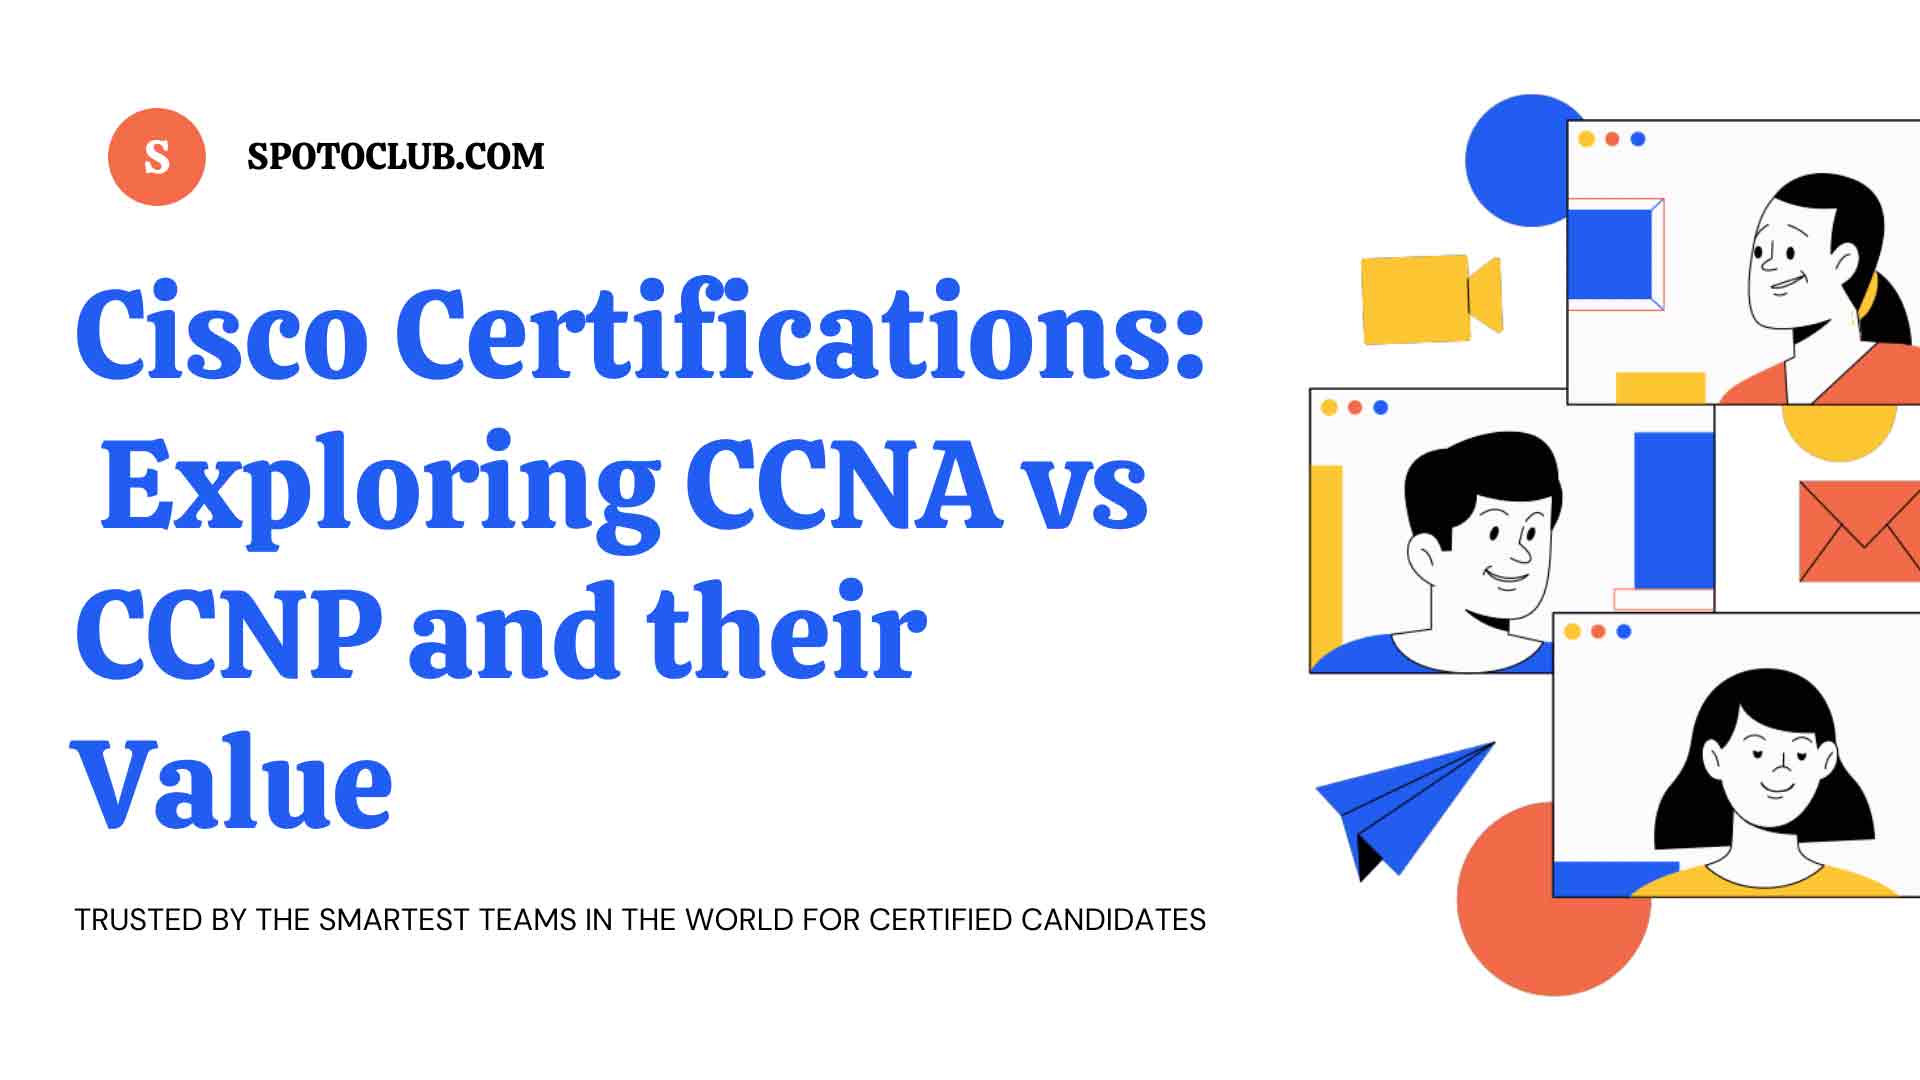 Cisco Certifications: Exploring CCNA vs CCNP and their Value